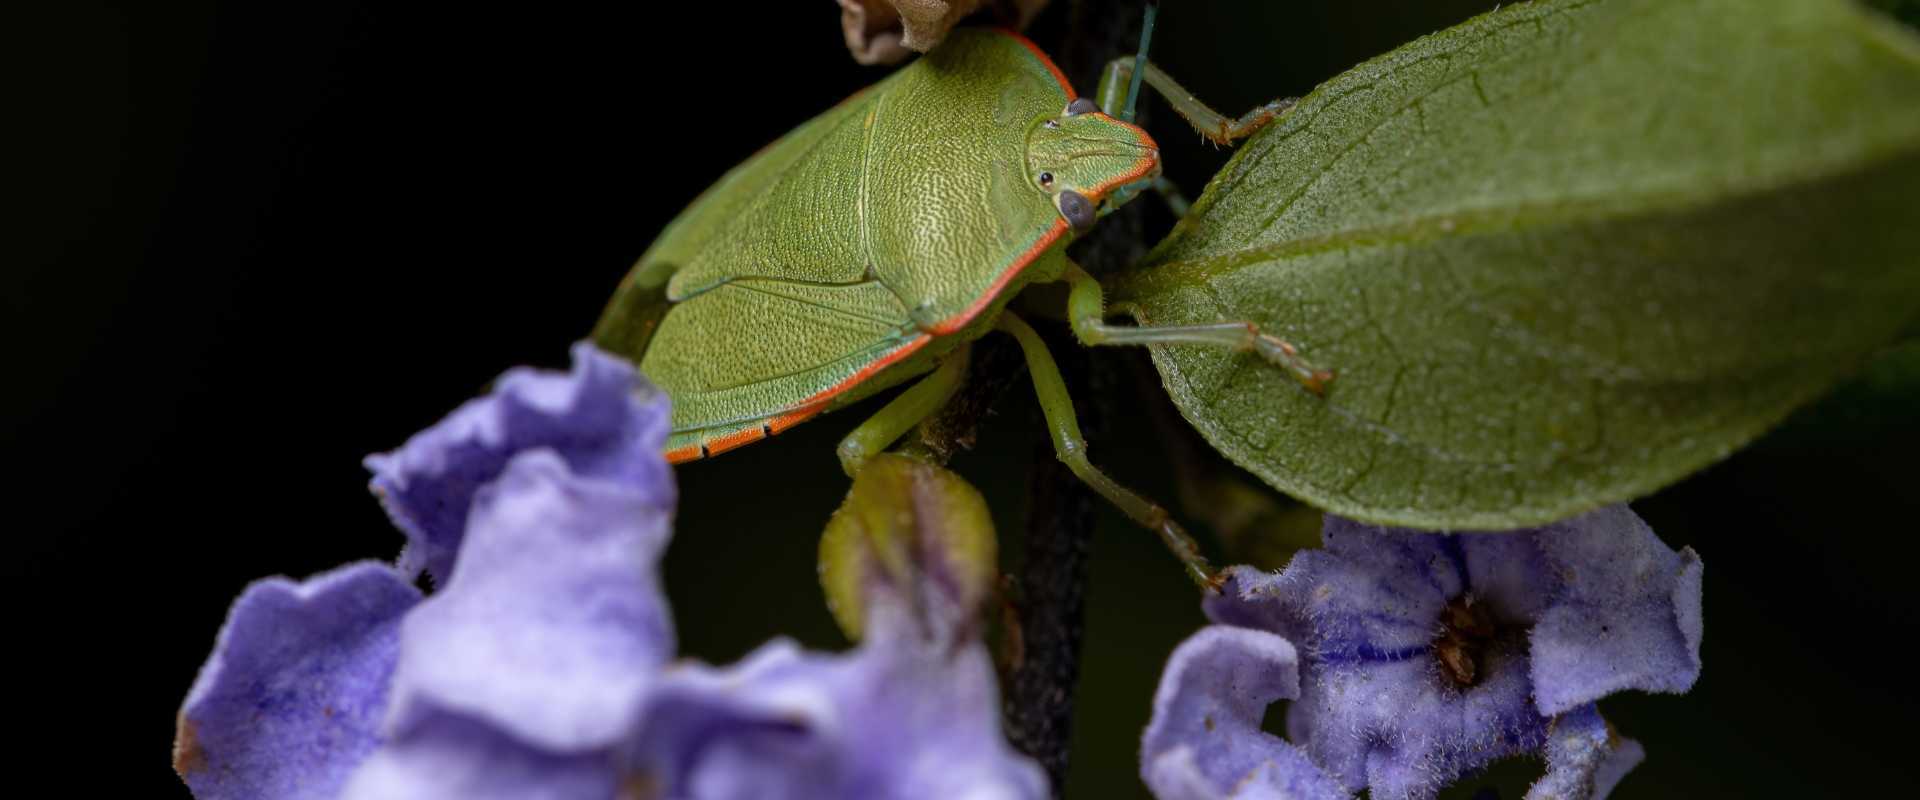 green stink bugs